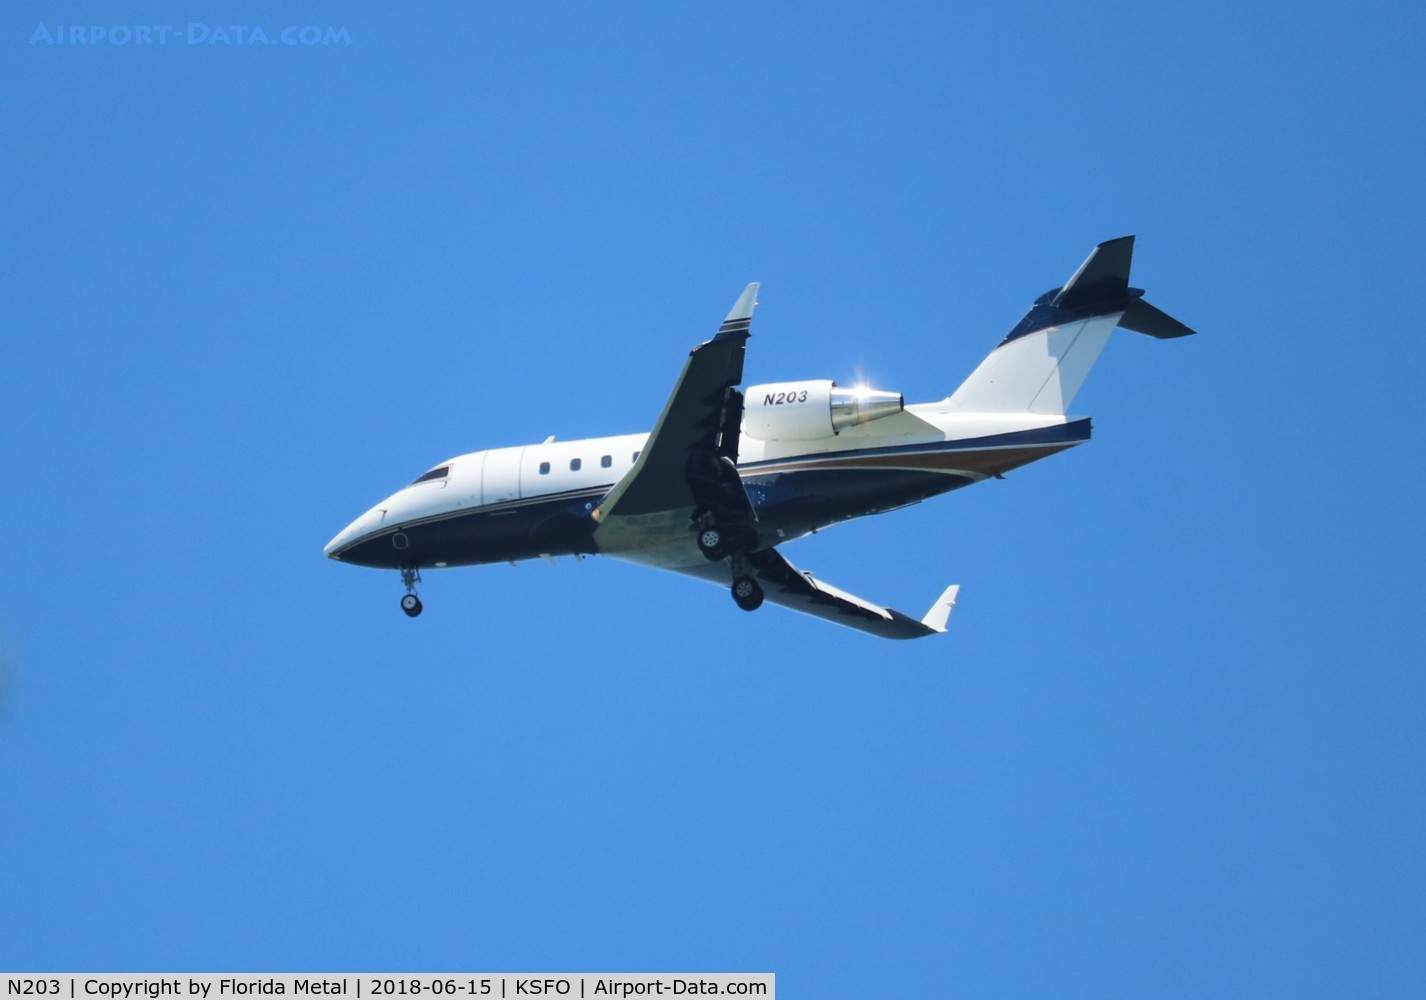 N203, 1998 Bombardier Challenger 604 (CL-600-2B16) C/N 5374, Challenger 604 zx